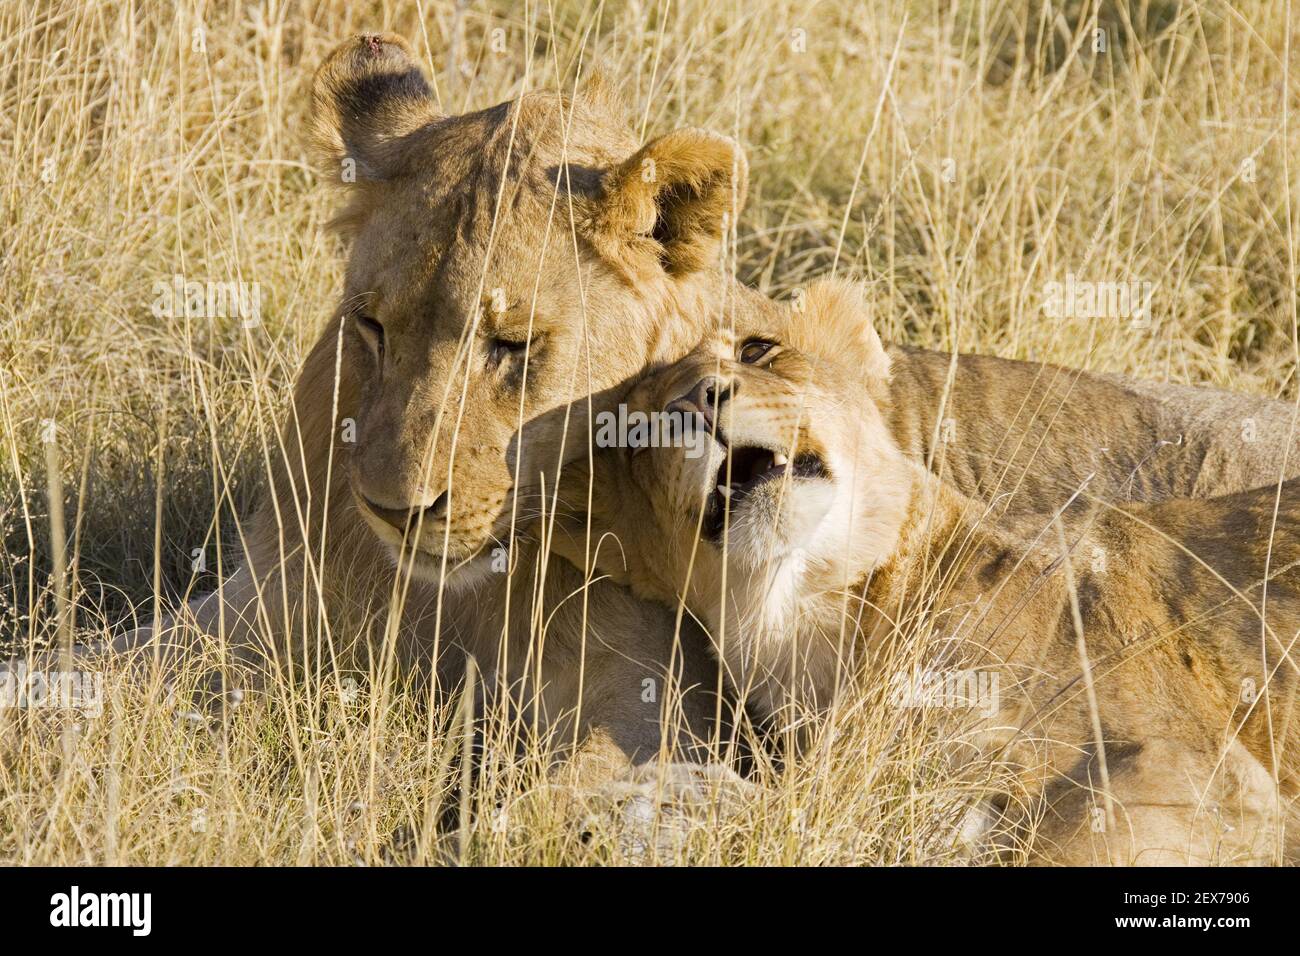 Mother lion and cub cuddling in the grass, (Panthera leo), Etosha National Park, Namibia, Lionmother and cup, Etosha National Pa Stock Photo